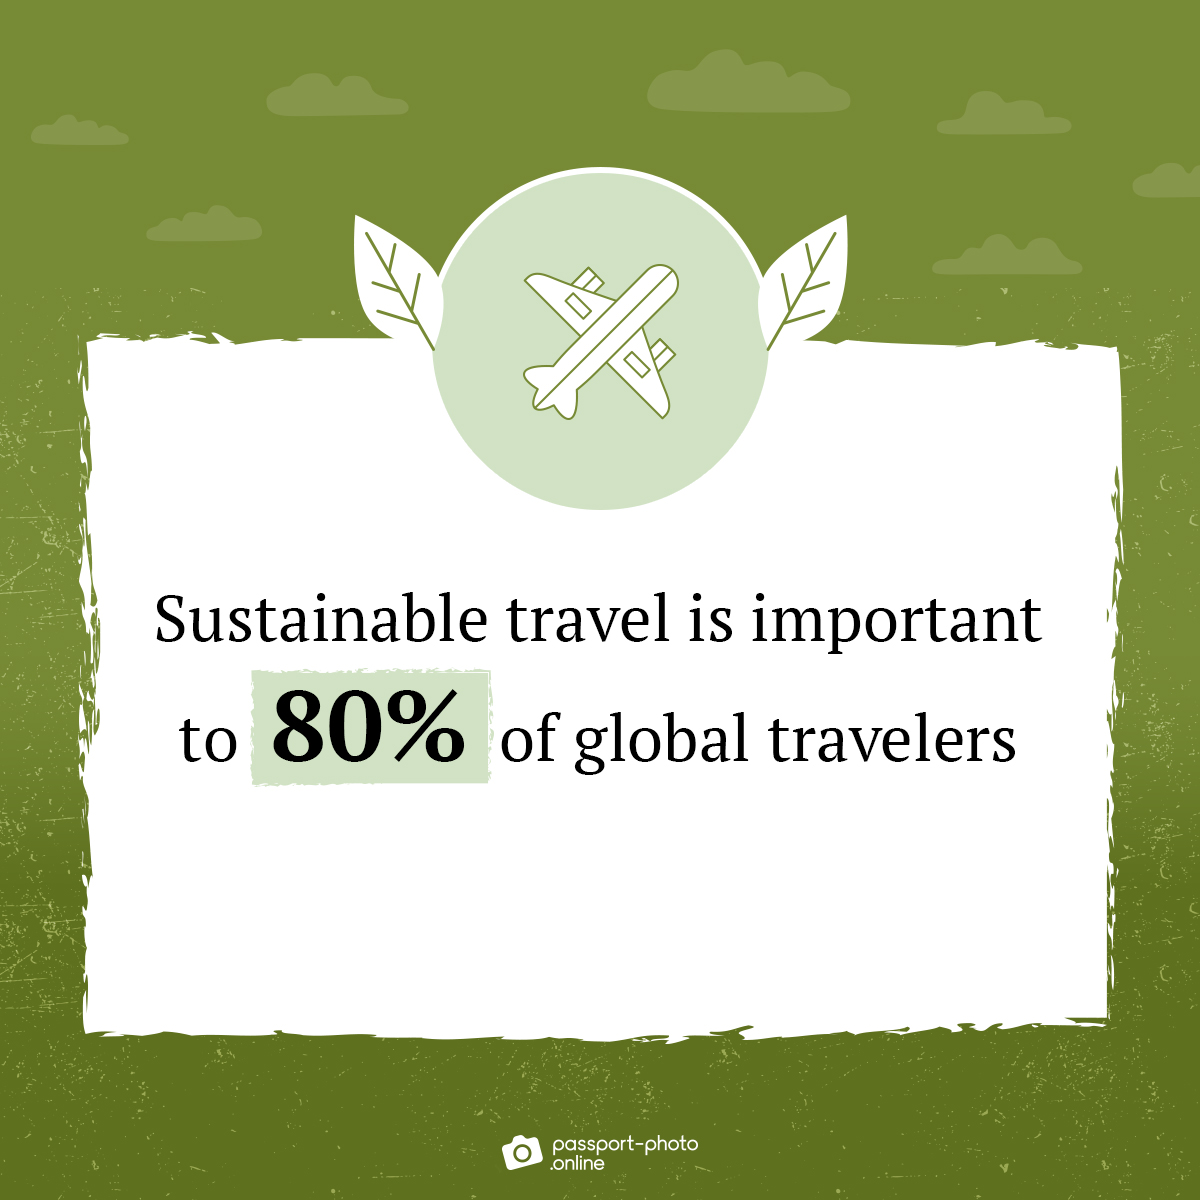 sustainable travel is important to 80% of global travelers